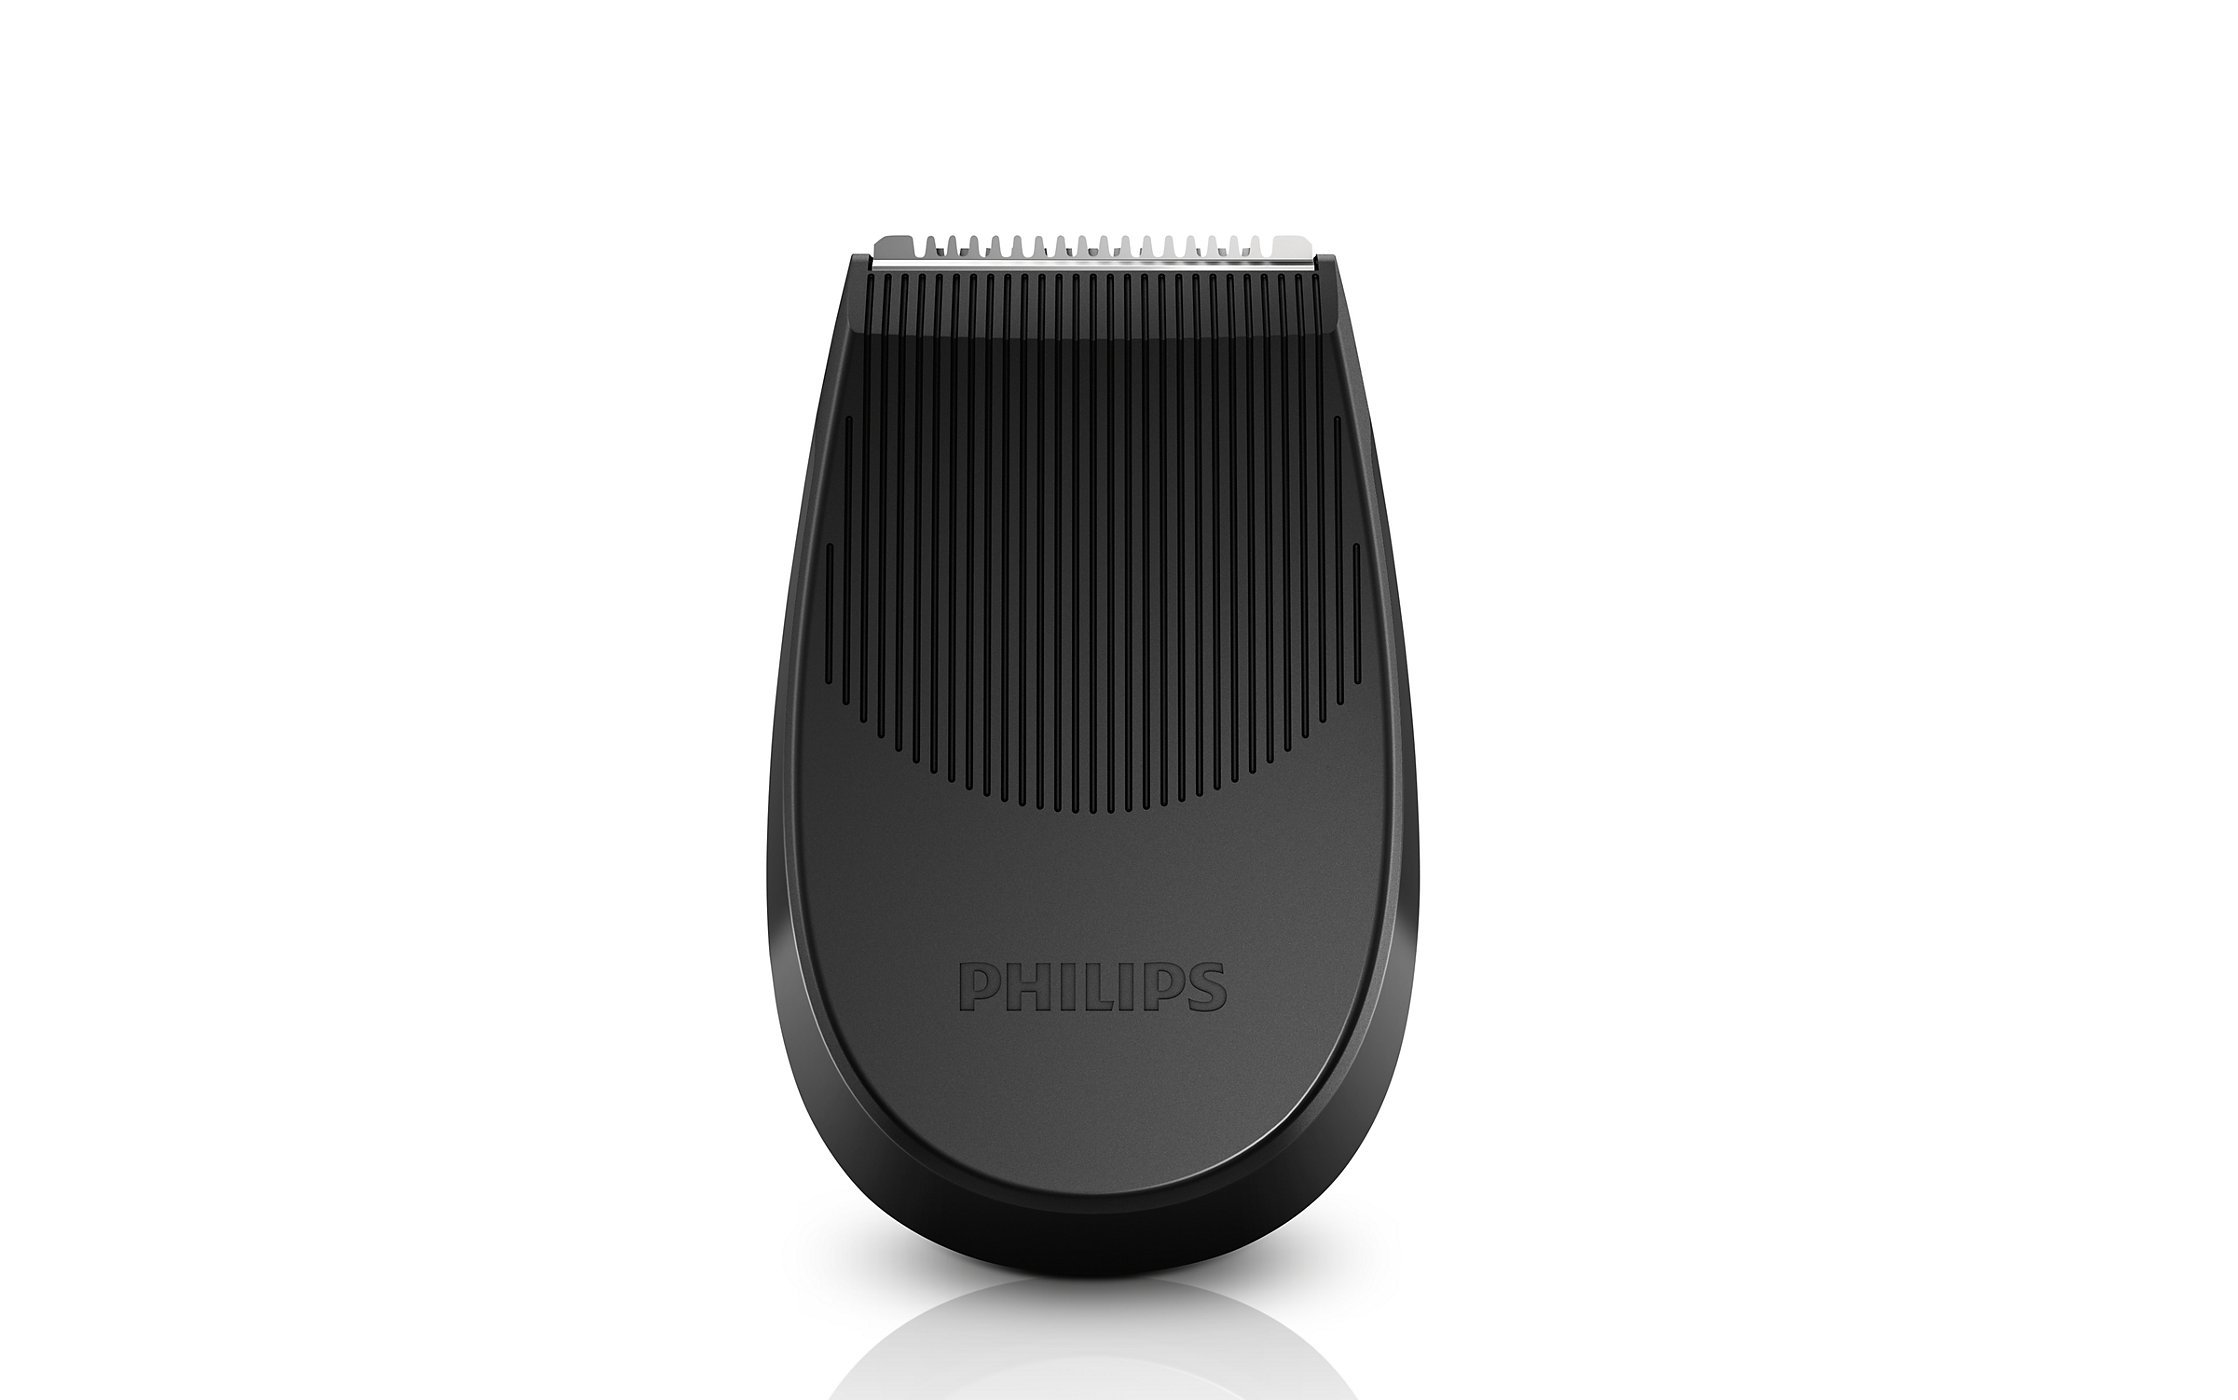  Philips S9031/12 SensoTouch 9000 